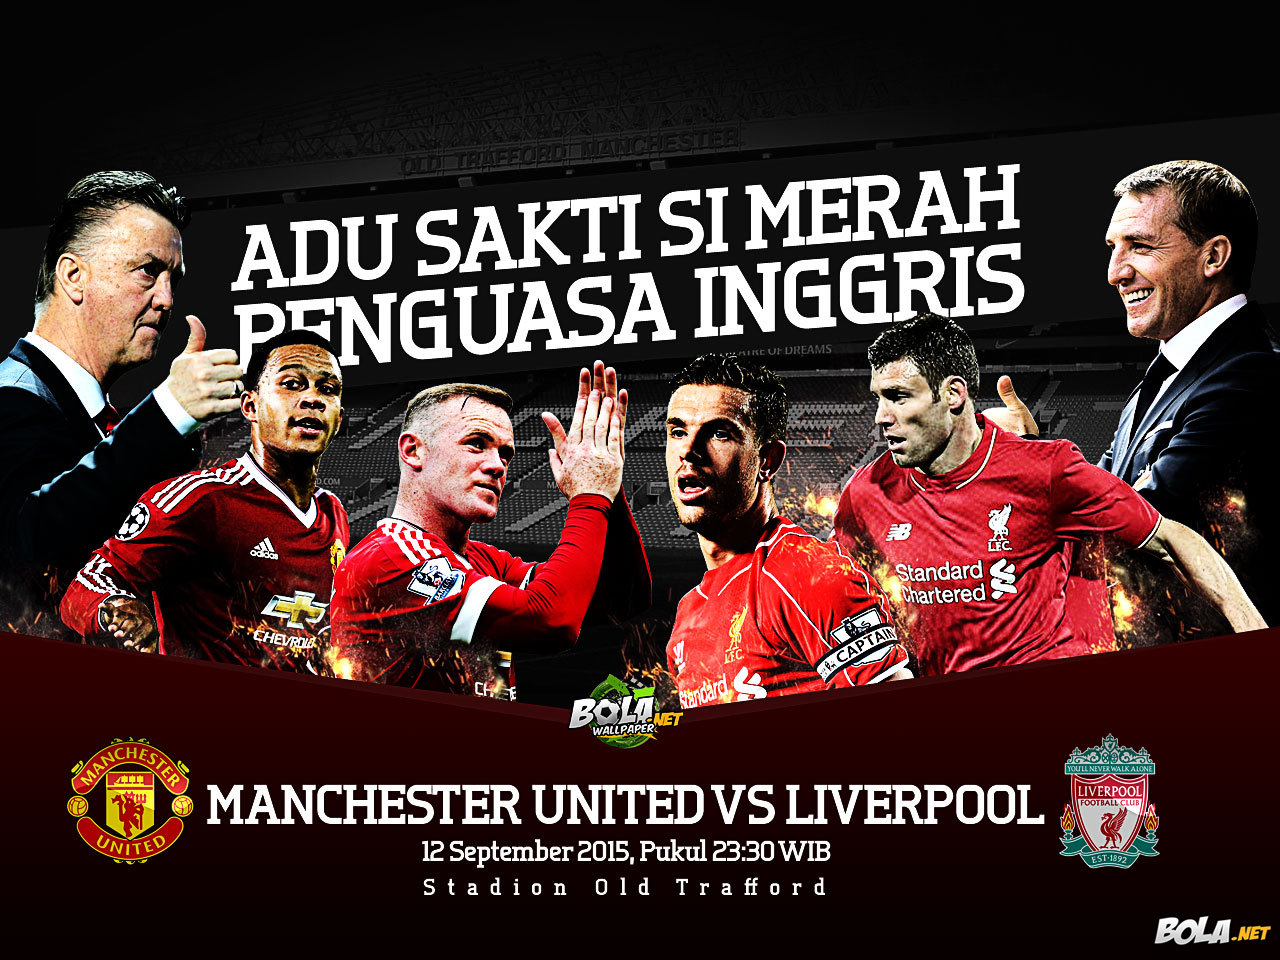 Download Wallpaper Manchester United Vs Liverpool Bolanet